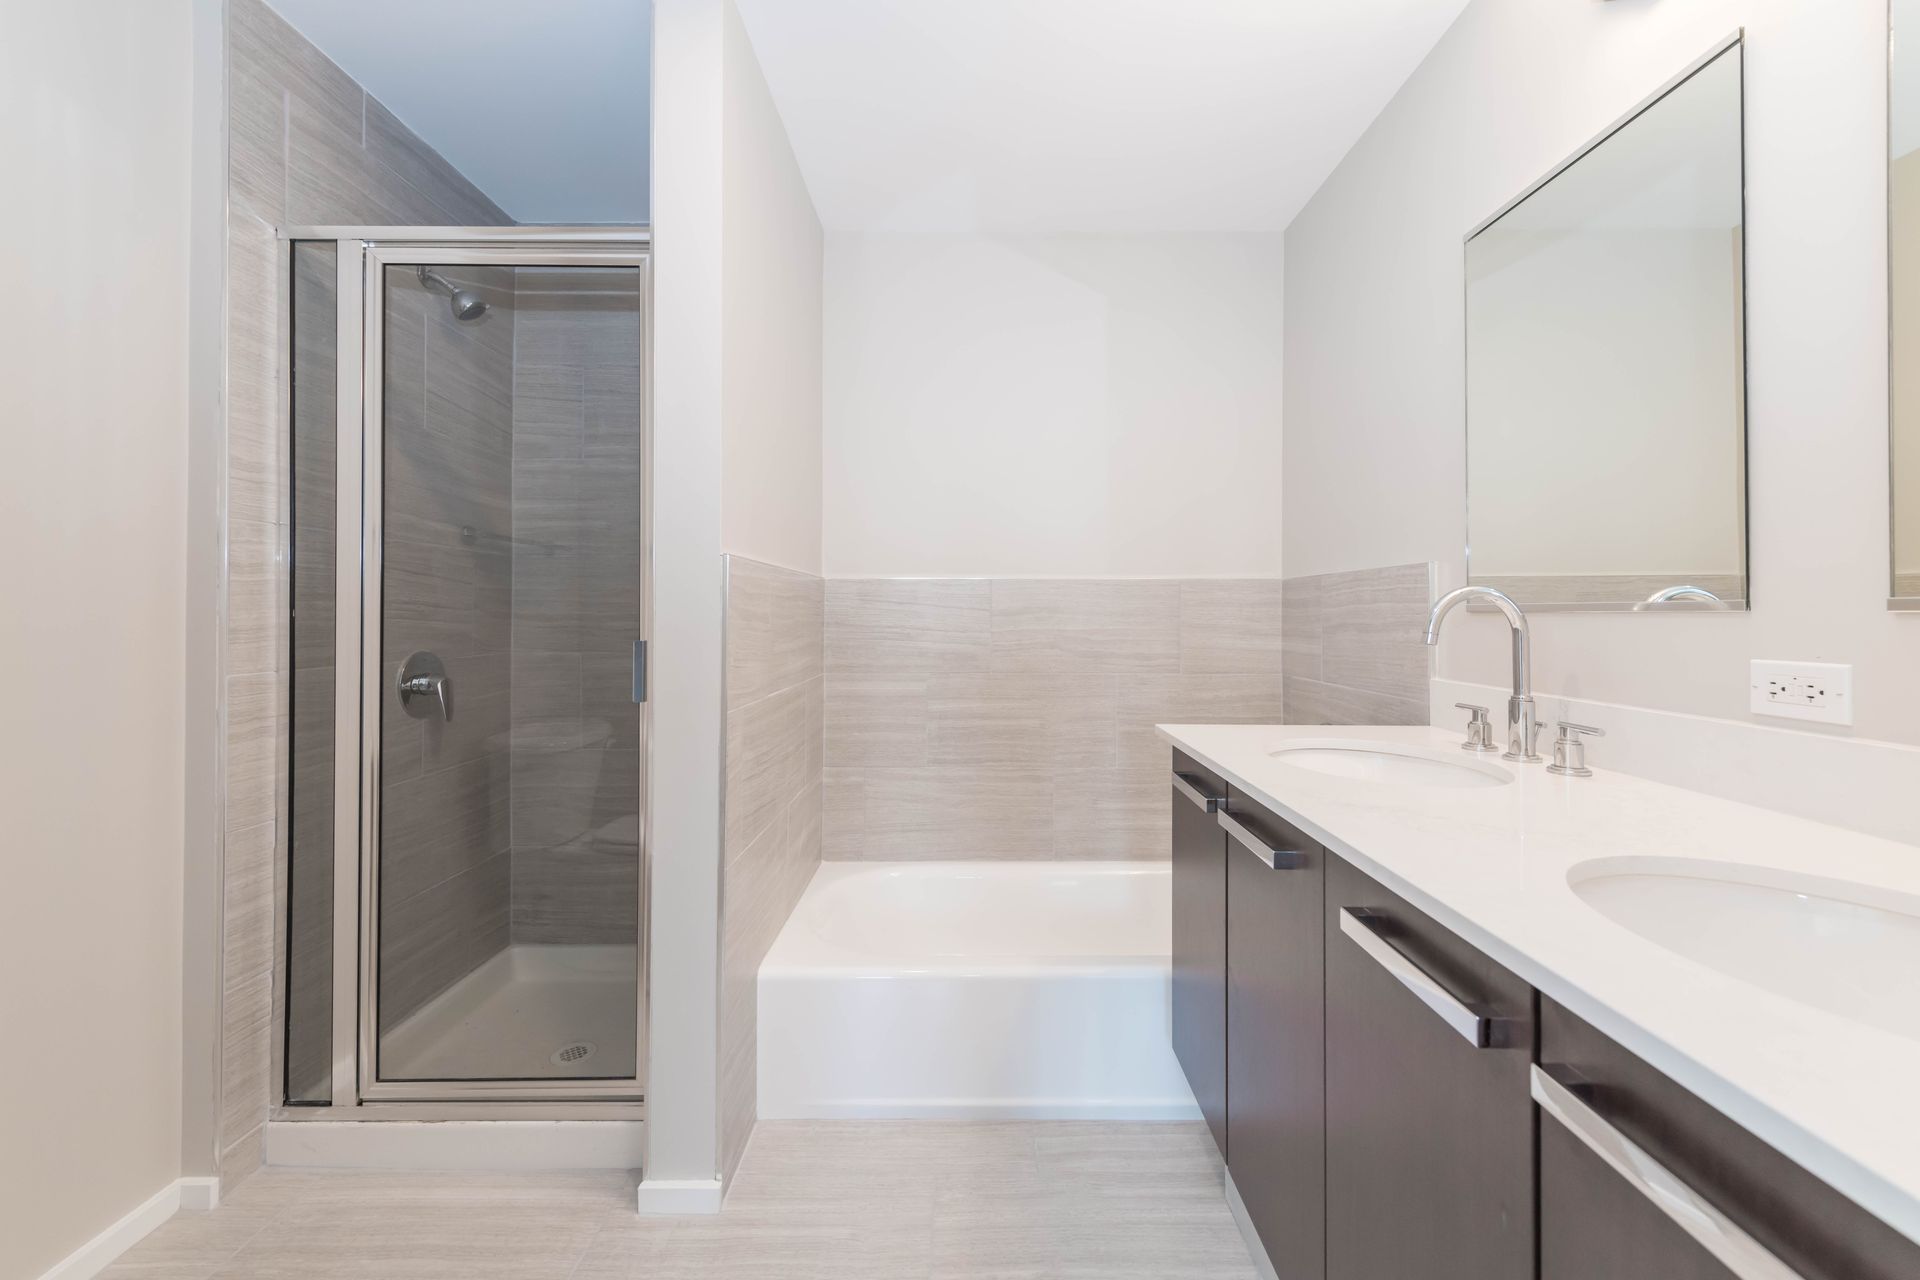 A bathroom with a sink , tub , shower and mirror at 24 S Morgan Apartments.